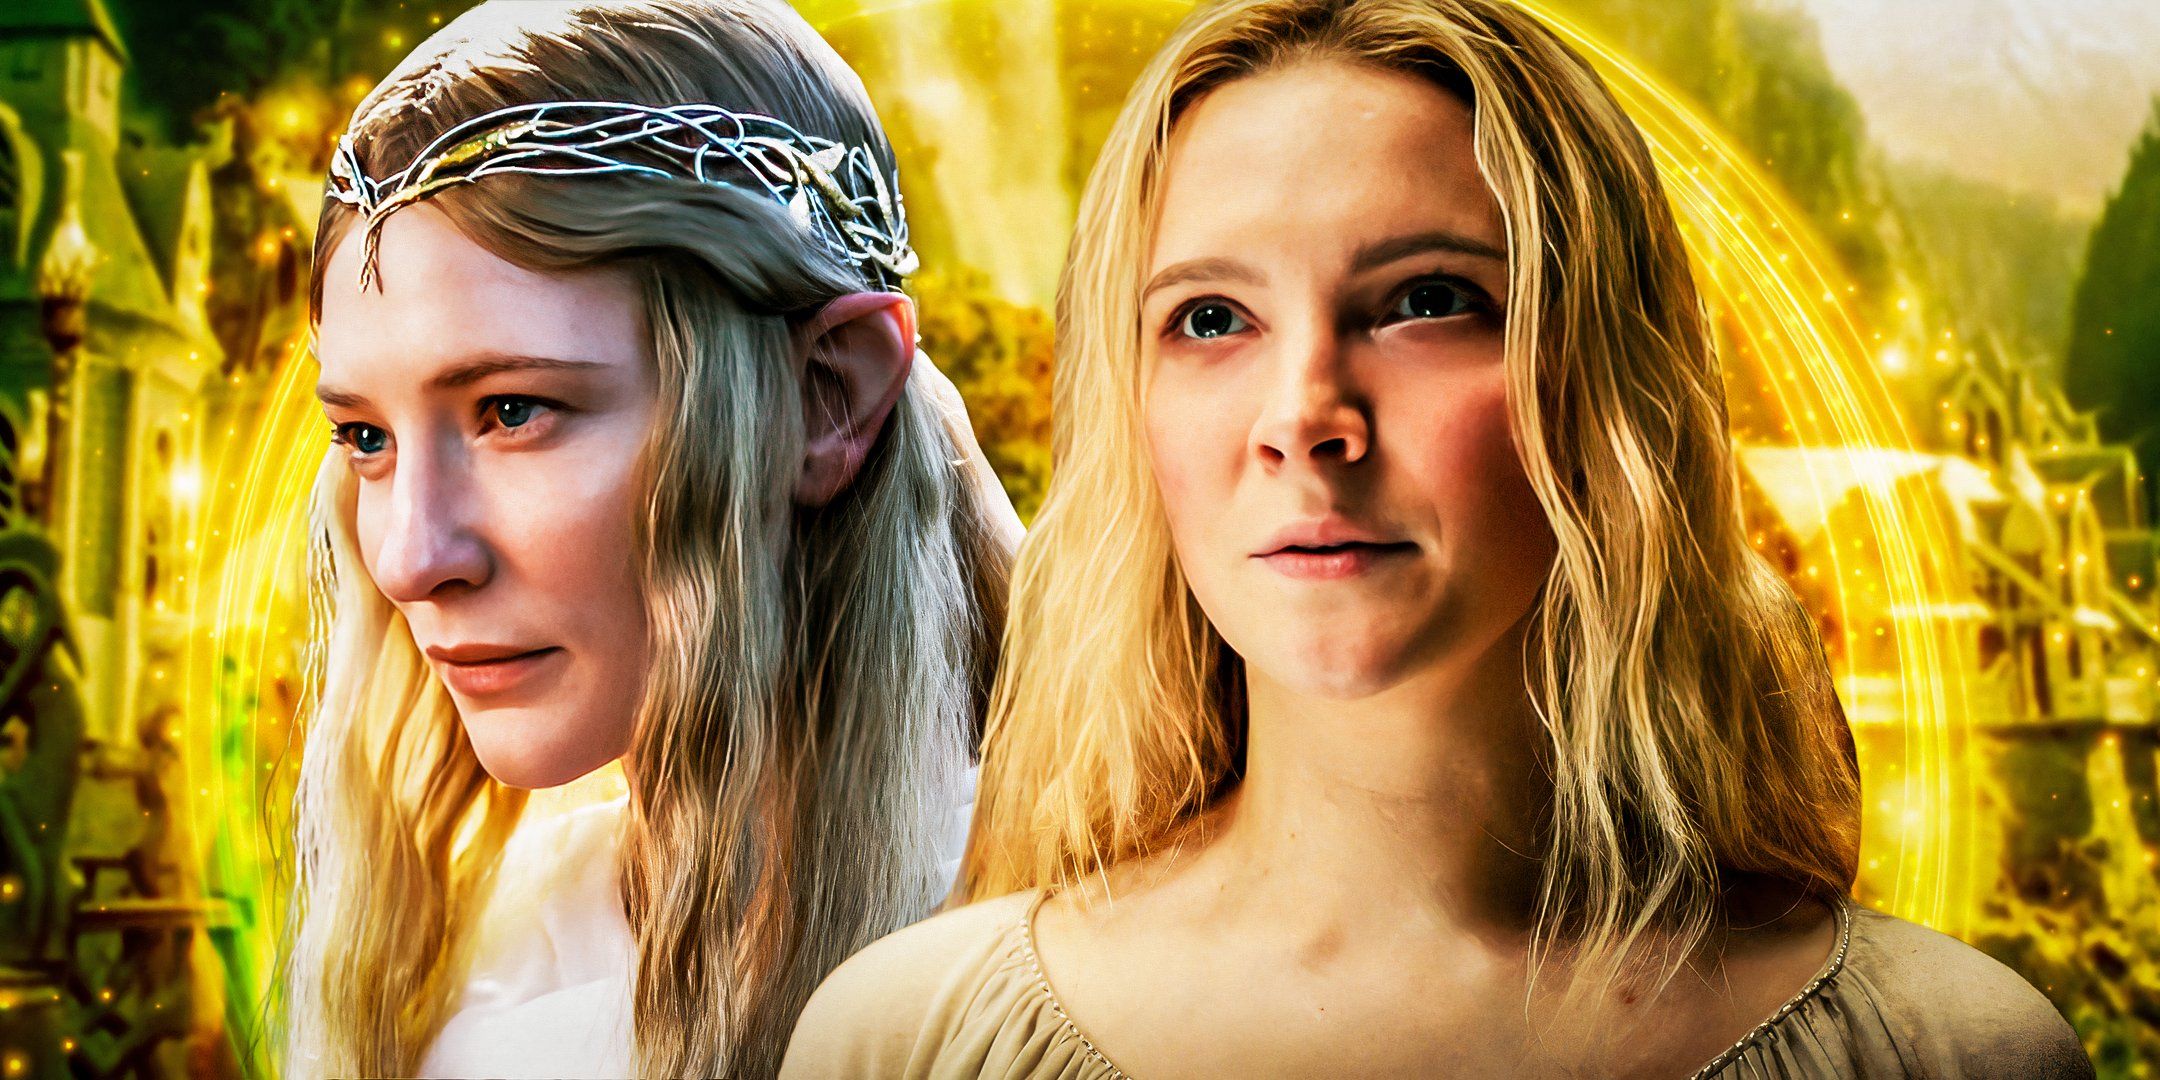 Cate Blanchett as Galadriel and Morfydd Clark as Galadriel from The Lord of the Rings Franchise